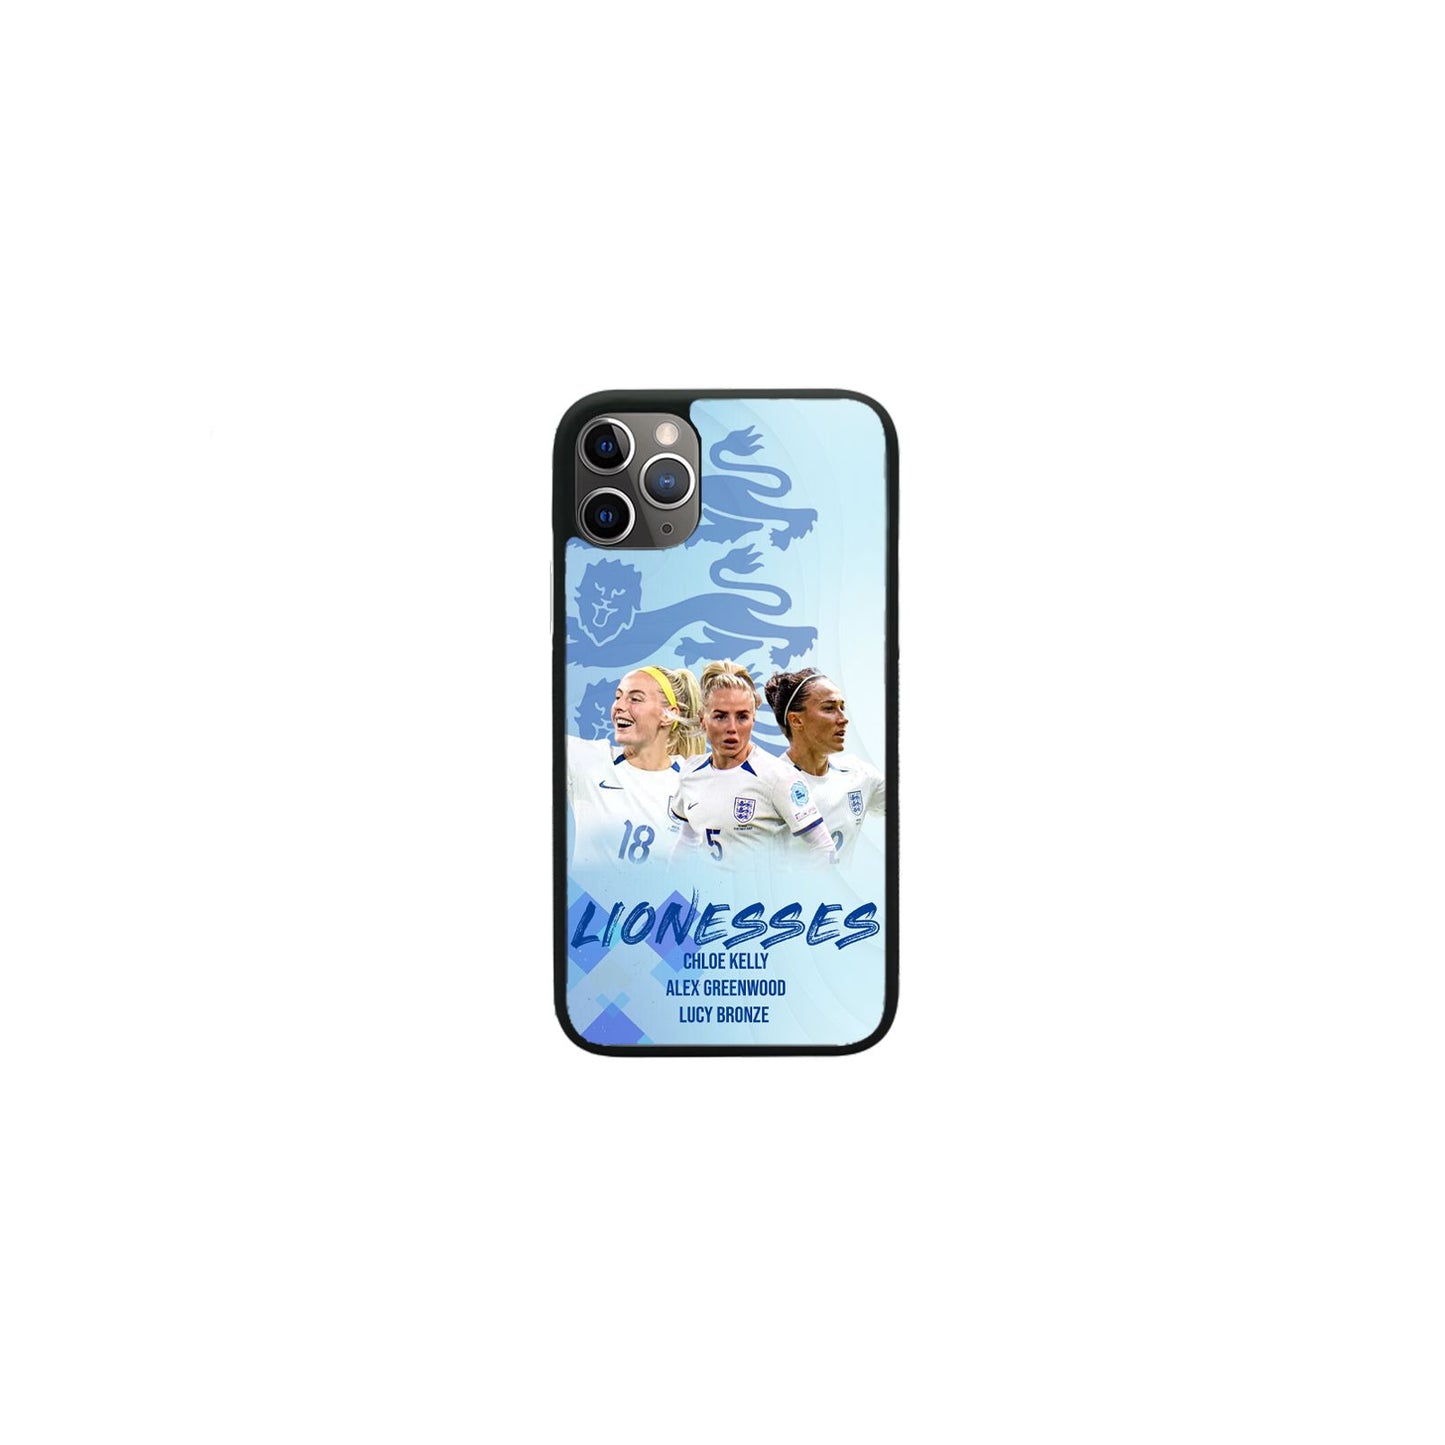 Limited Edition Lioness Phone Case Alex Greenwood,Lucy Bronze,Chloe Kelly